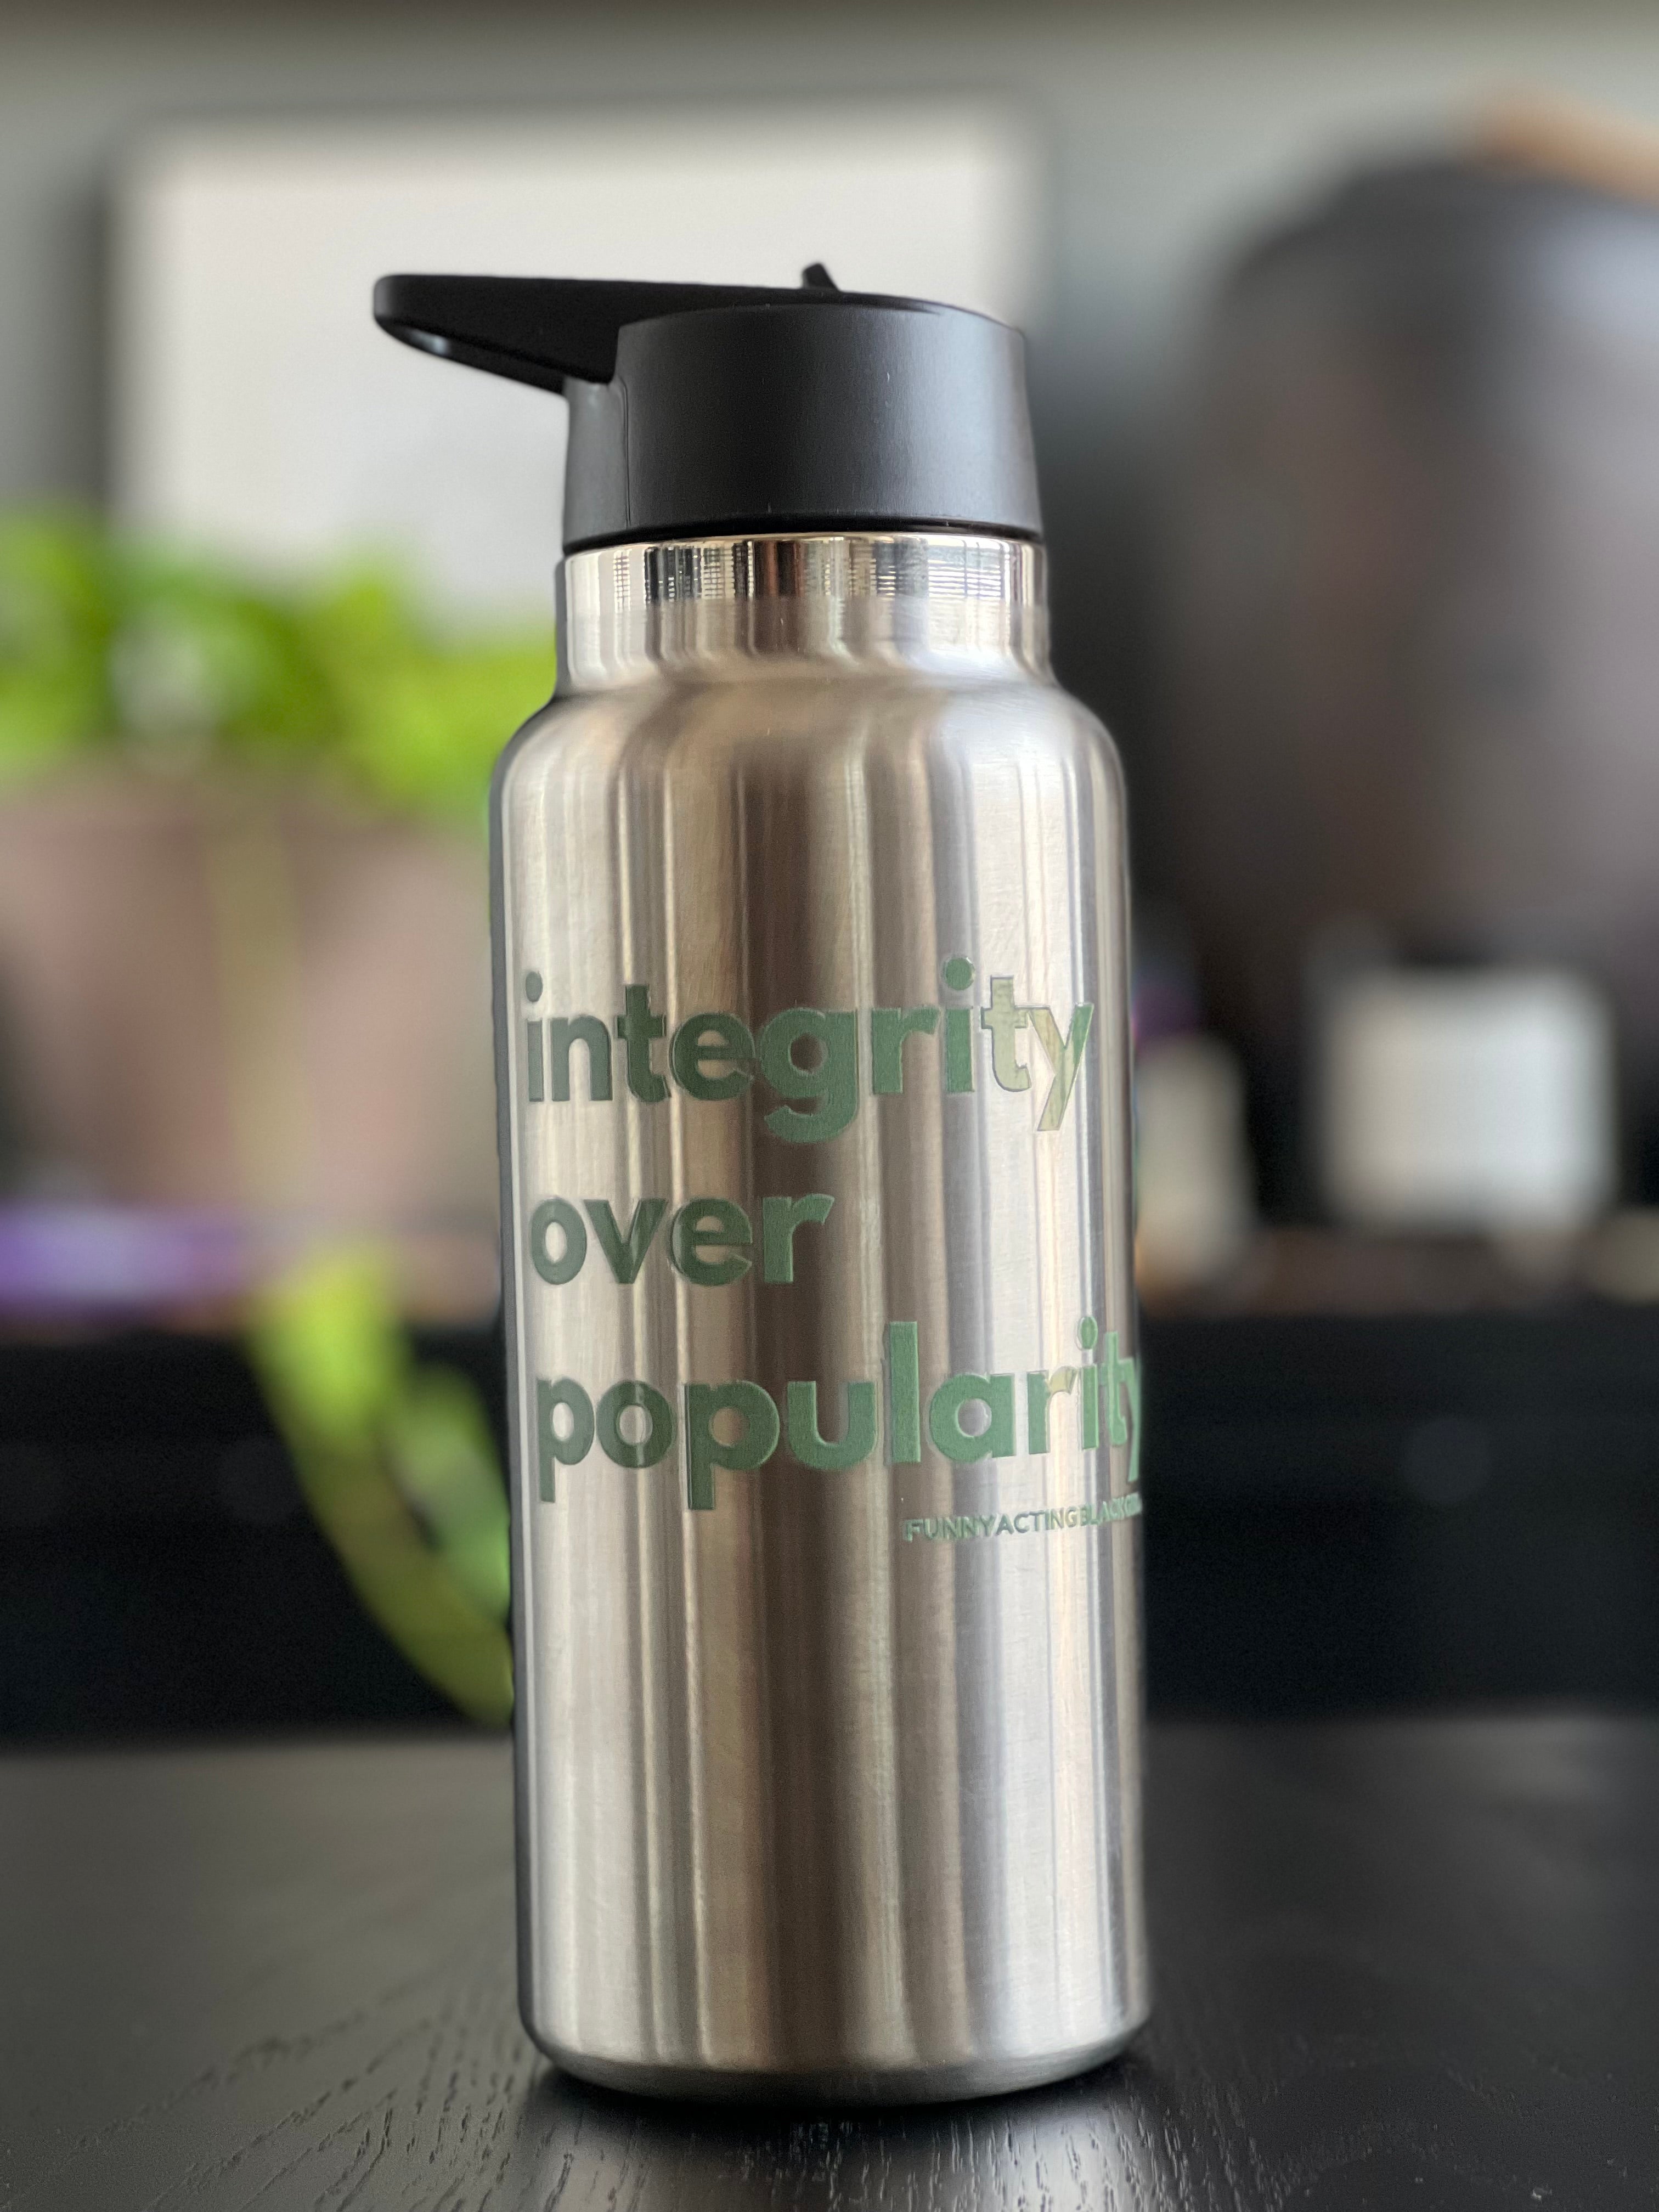 Integrity Over Popularity: Stainless Steel Water Bottle (32 oz)